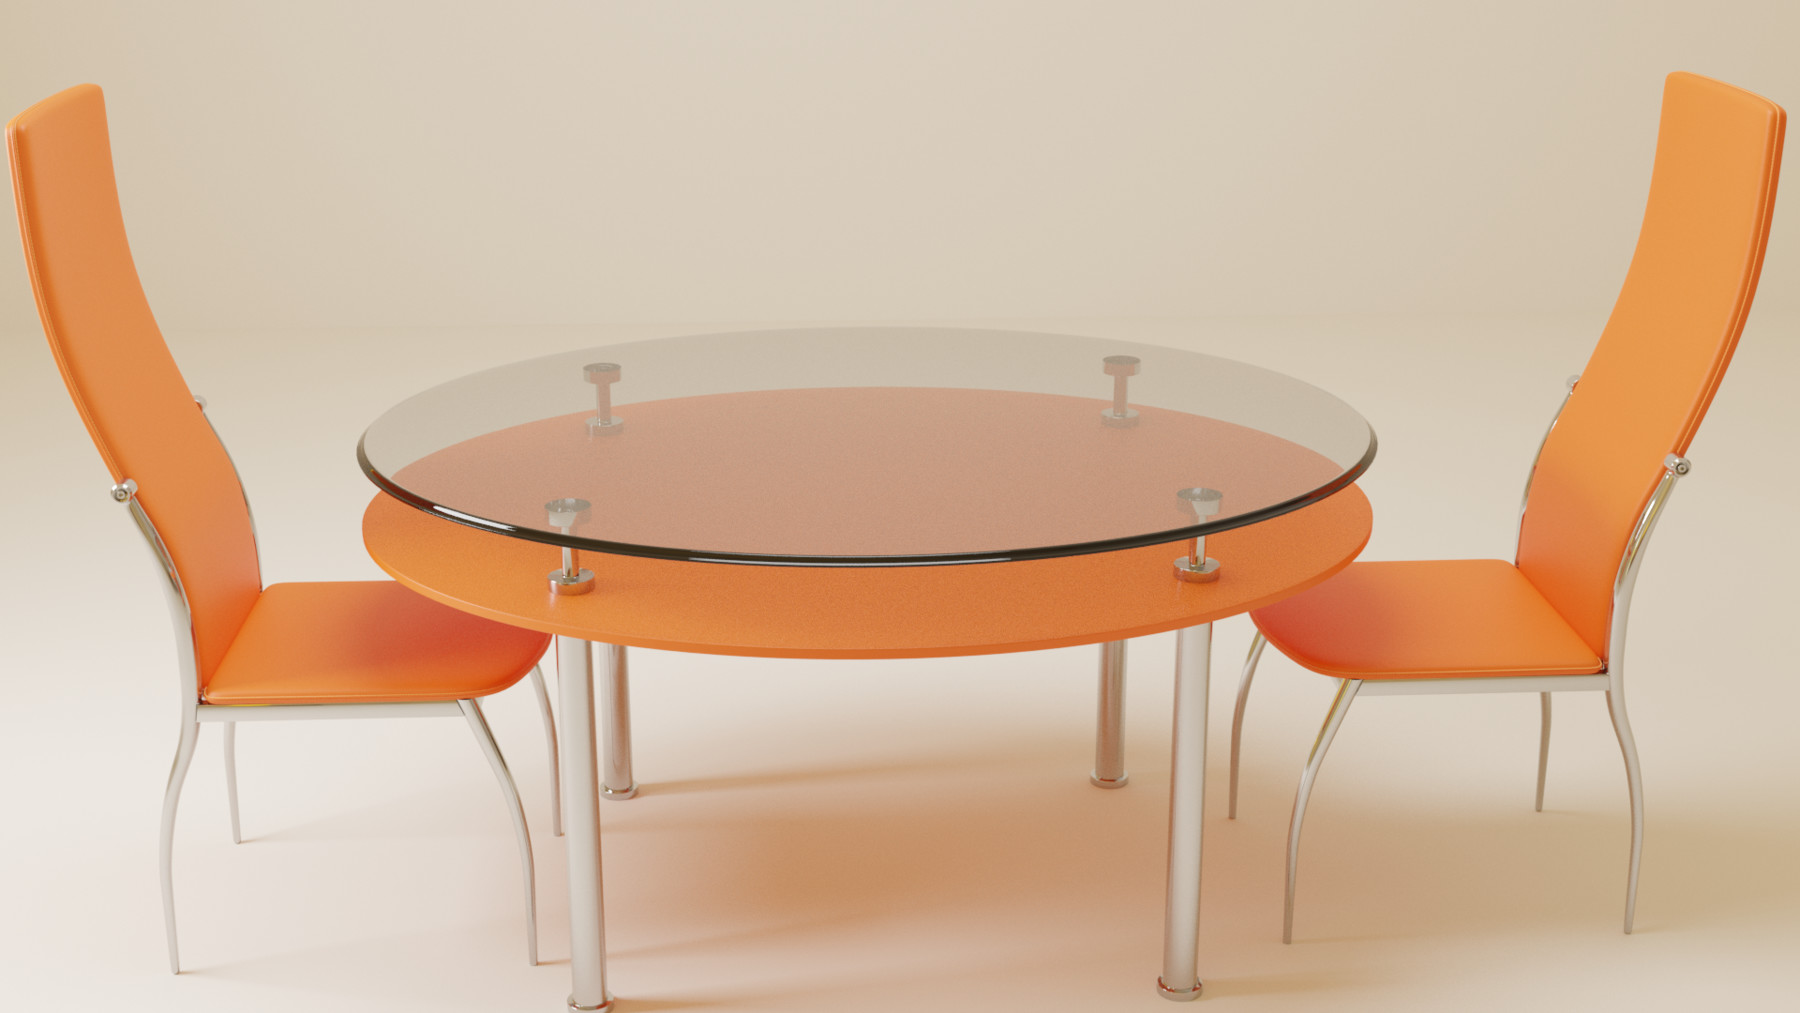 Navid Valizadeh Glass Table For Kitchen With Chairs